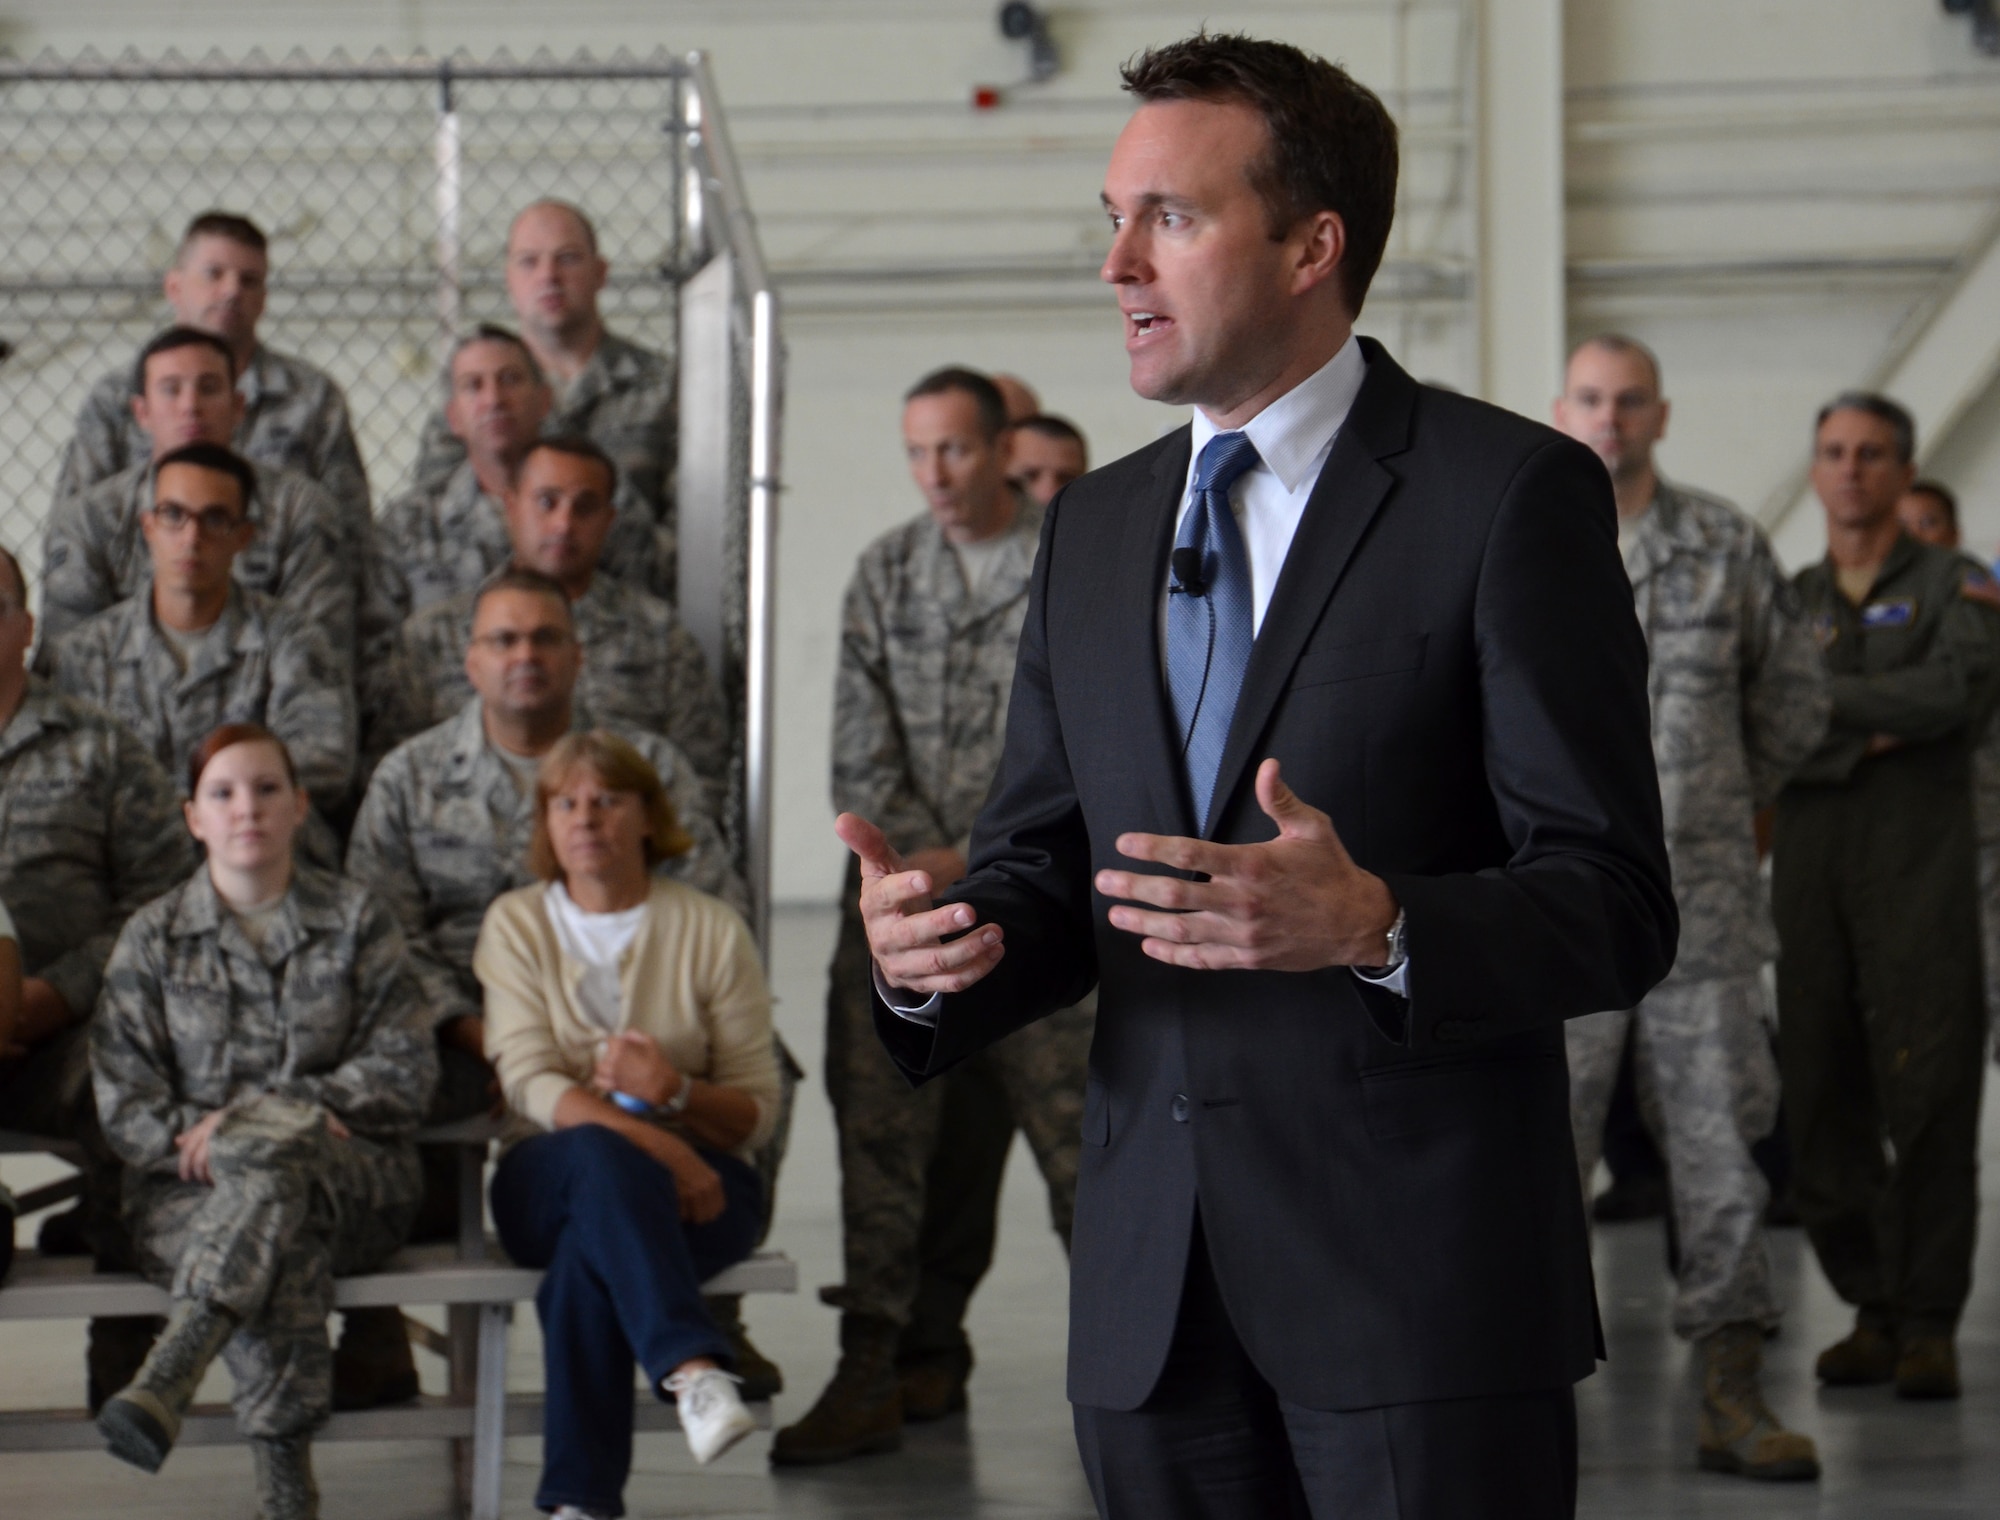 Acting Secretary of the Air Force, Eric Fanning, visits Westover Air Reserve Base, Mass., July 25. During his tour of the nation's largest Air Force Reserve base, Fanning saw its joint-service mission, "flew" a C-5 simulator, toured the base's control tower, and spoke to more than 450 troops about Air Force issues. (U.S. Air Force photo/SrA. Kelly Galloway)